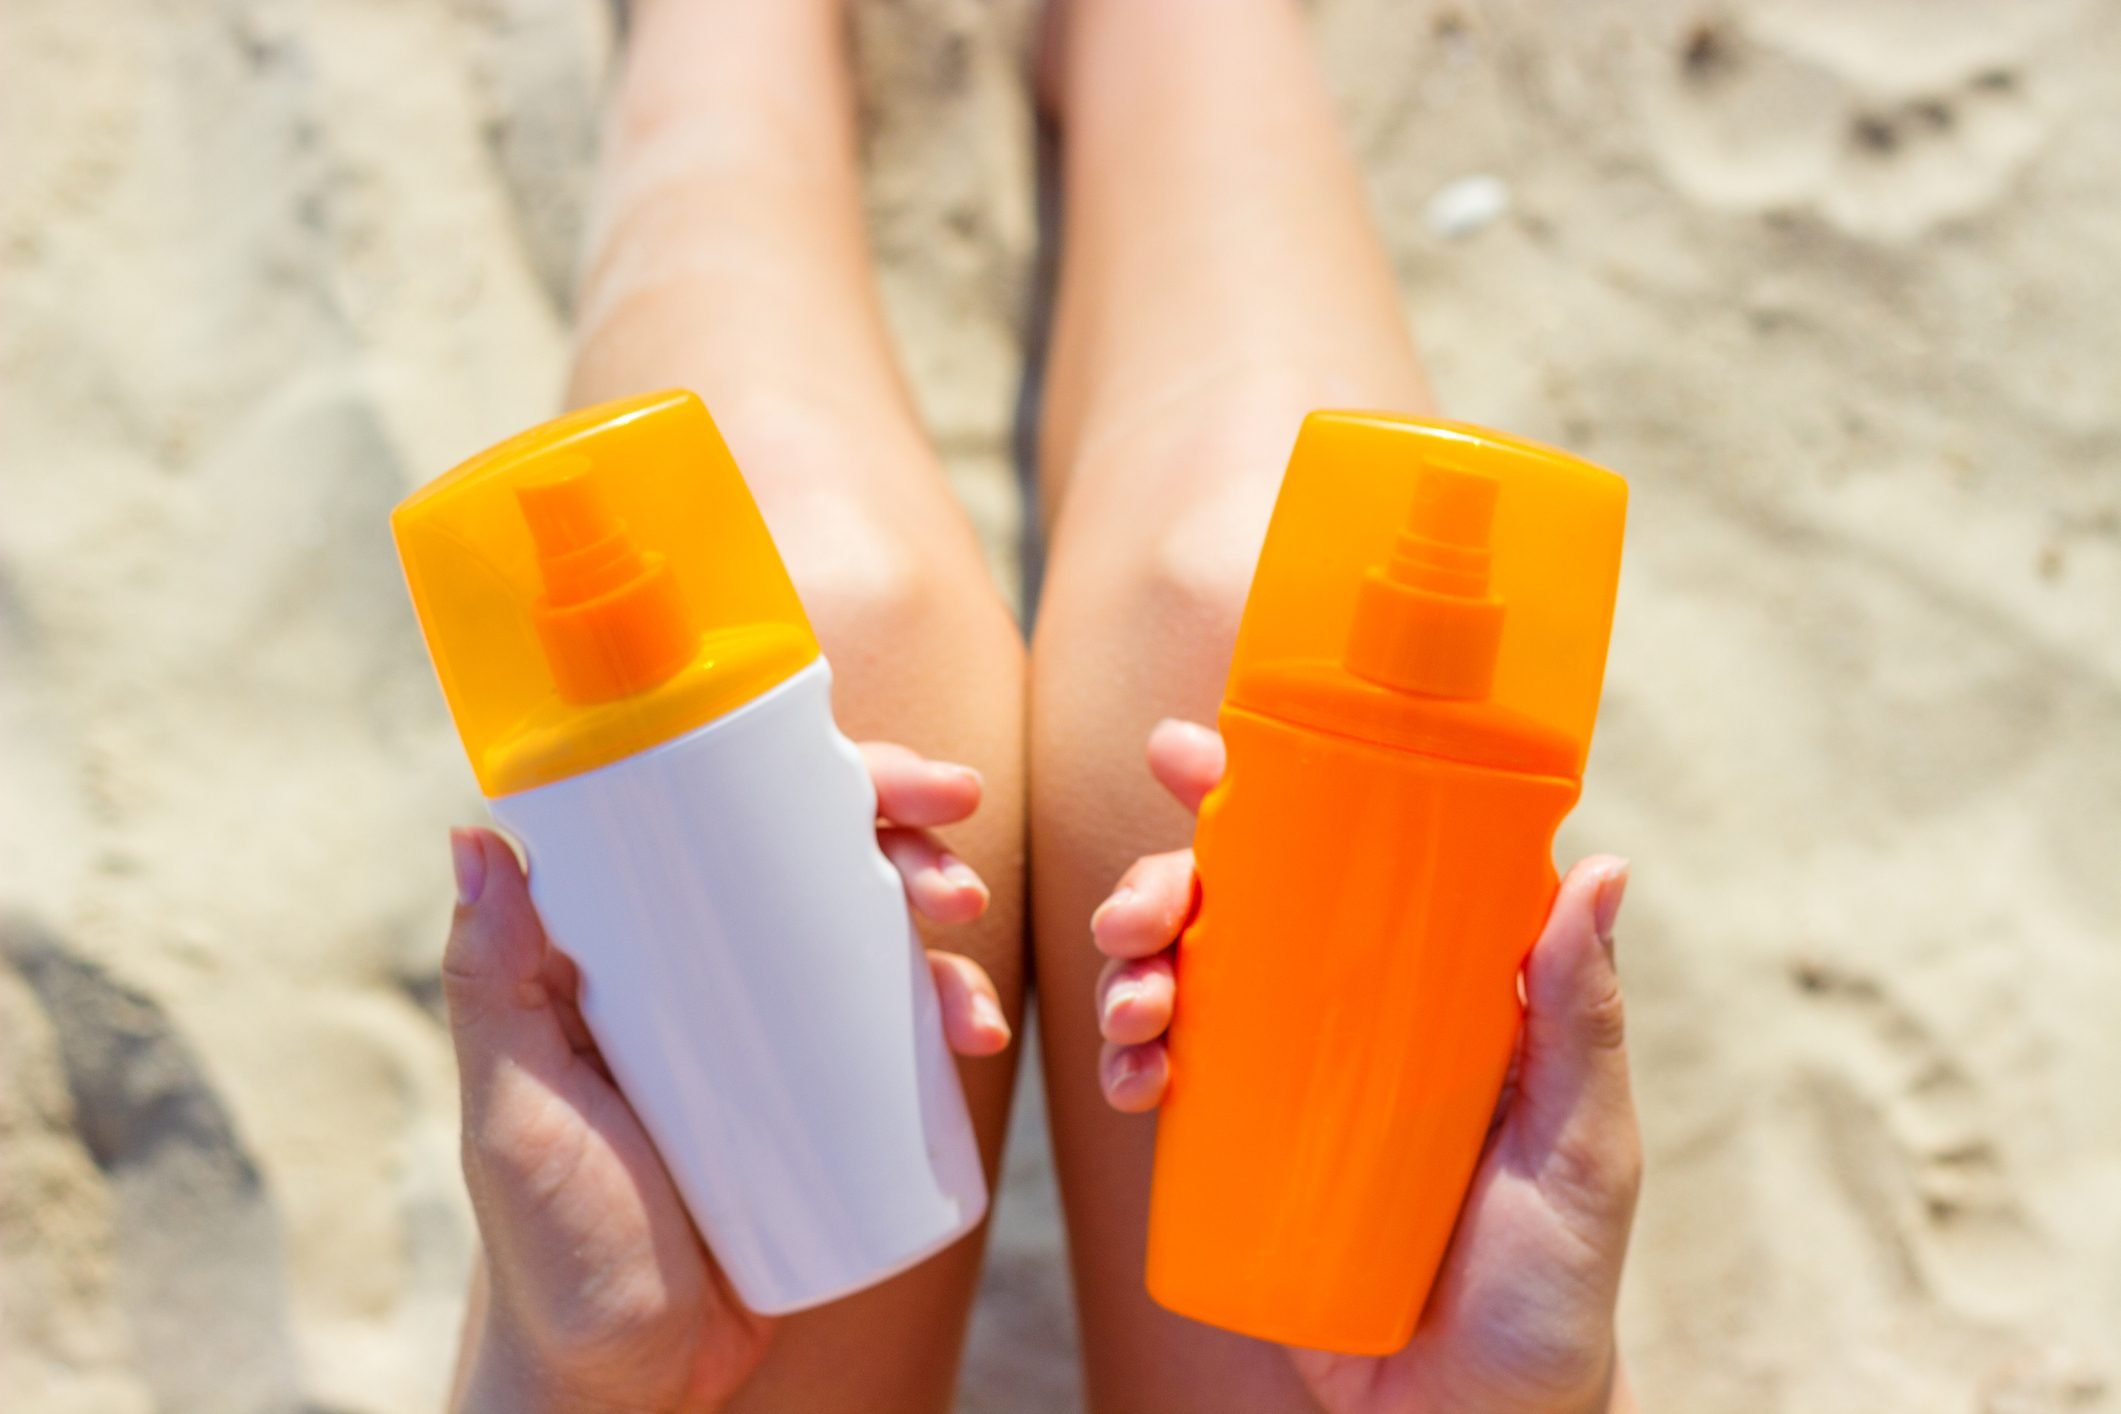 2 Sunscreen Brands Have Recalled 20,000 Products Sold Nationwide